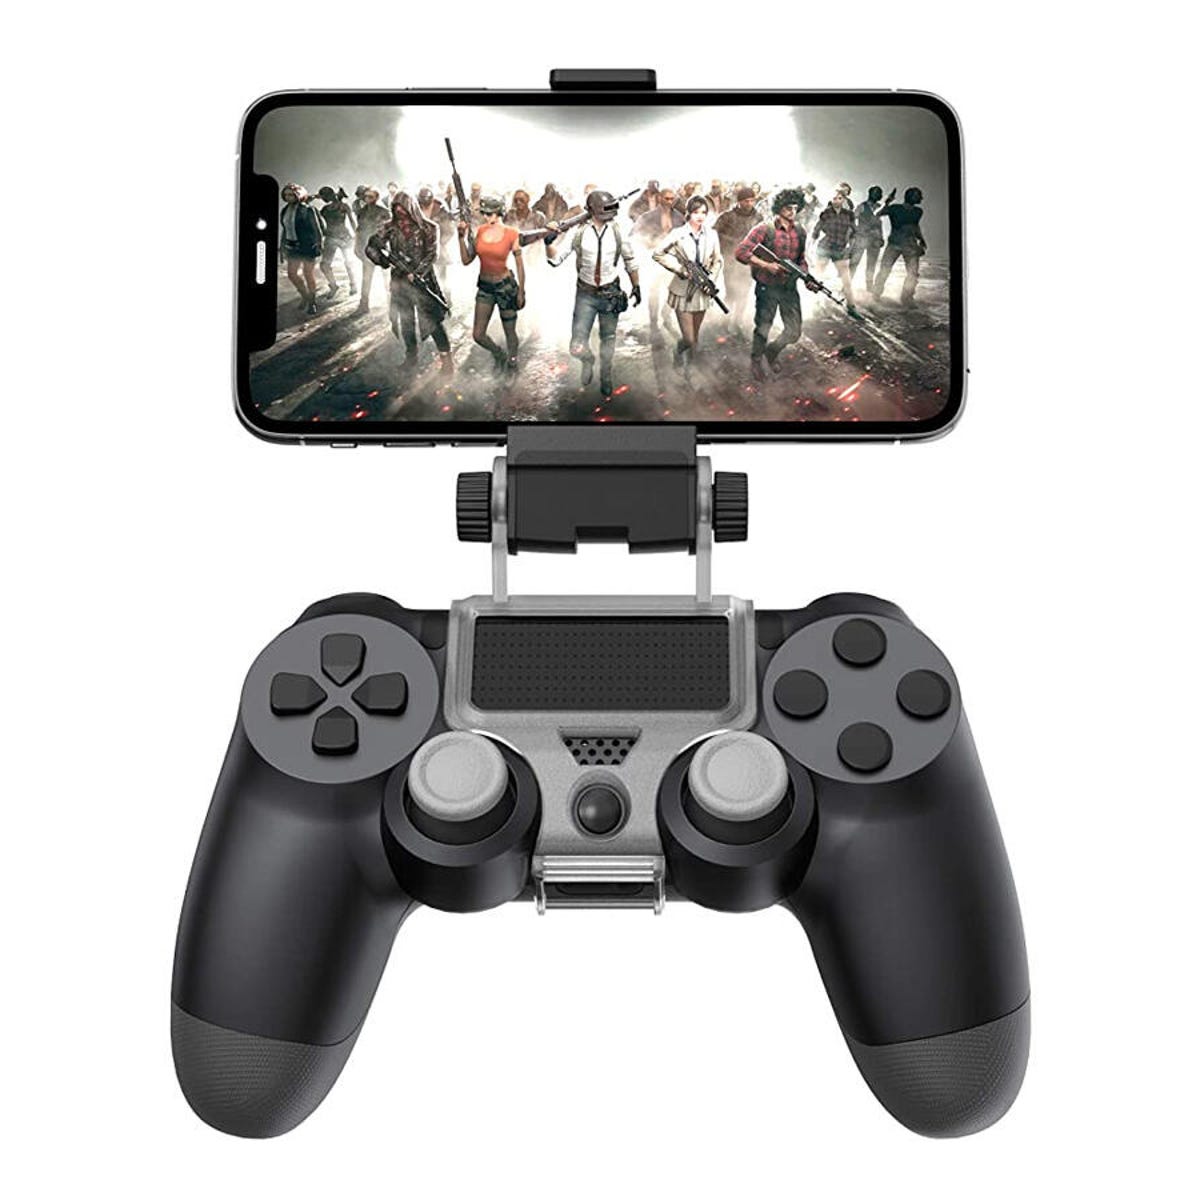 how-to-connect-iphone-to-ps3-to-watch-movies